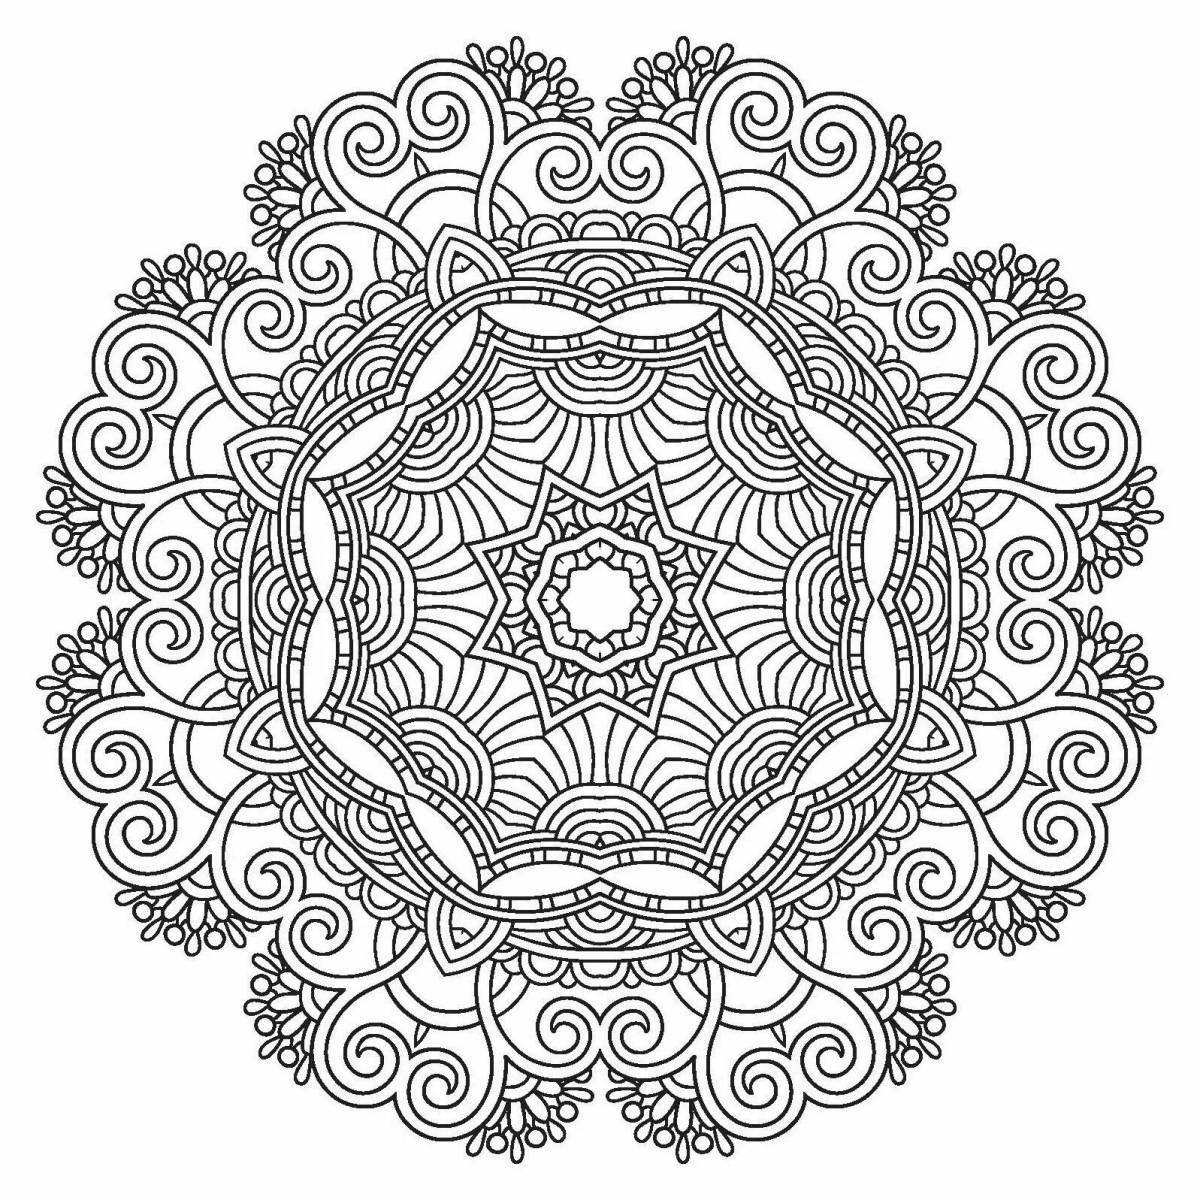 Calm coloring book for peace of mind